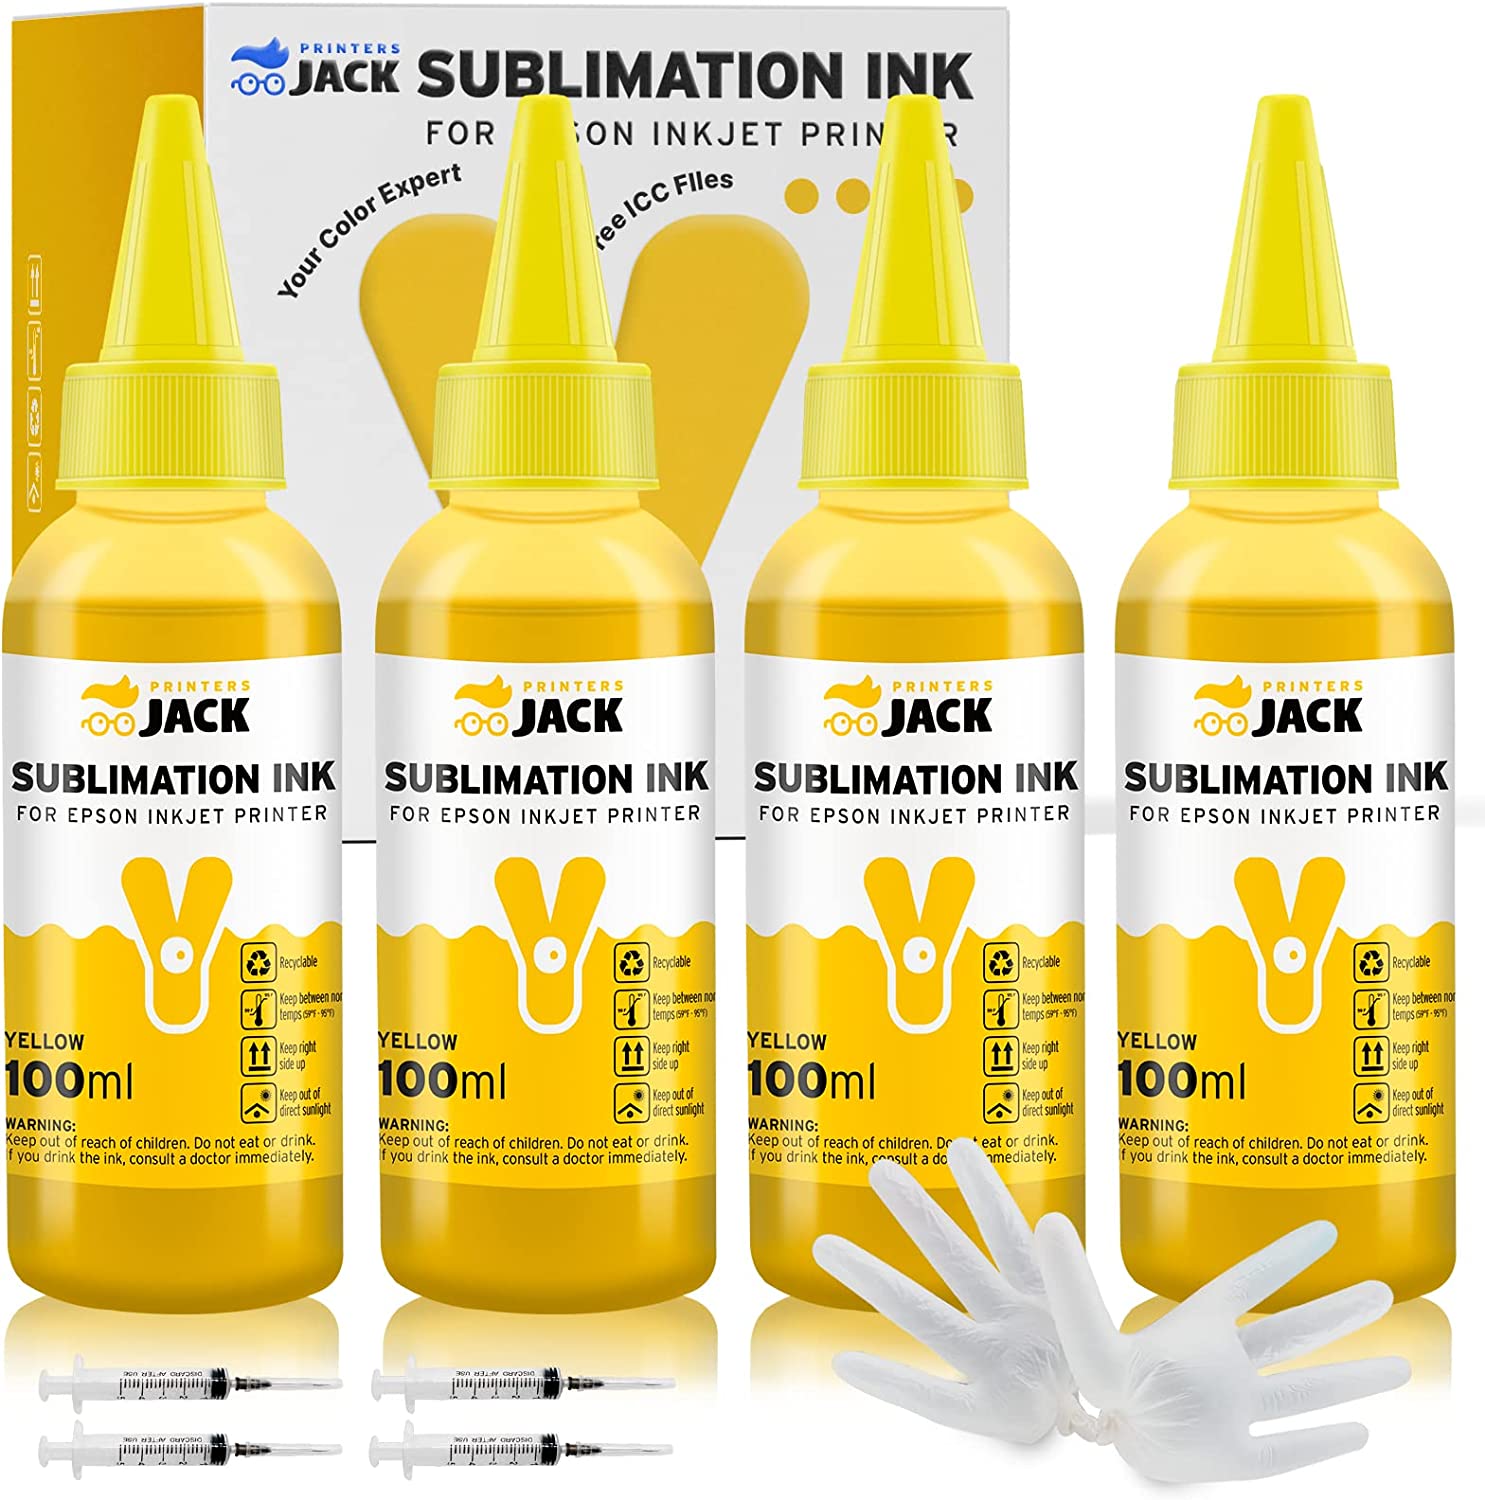 Printers Jack 400ml Sublimation Ink Refill for Eco UAE